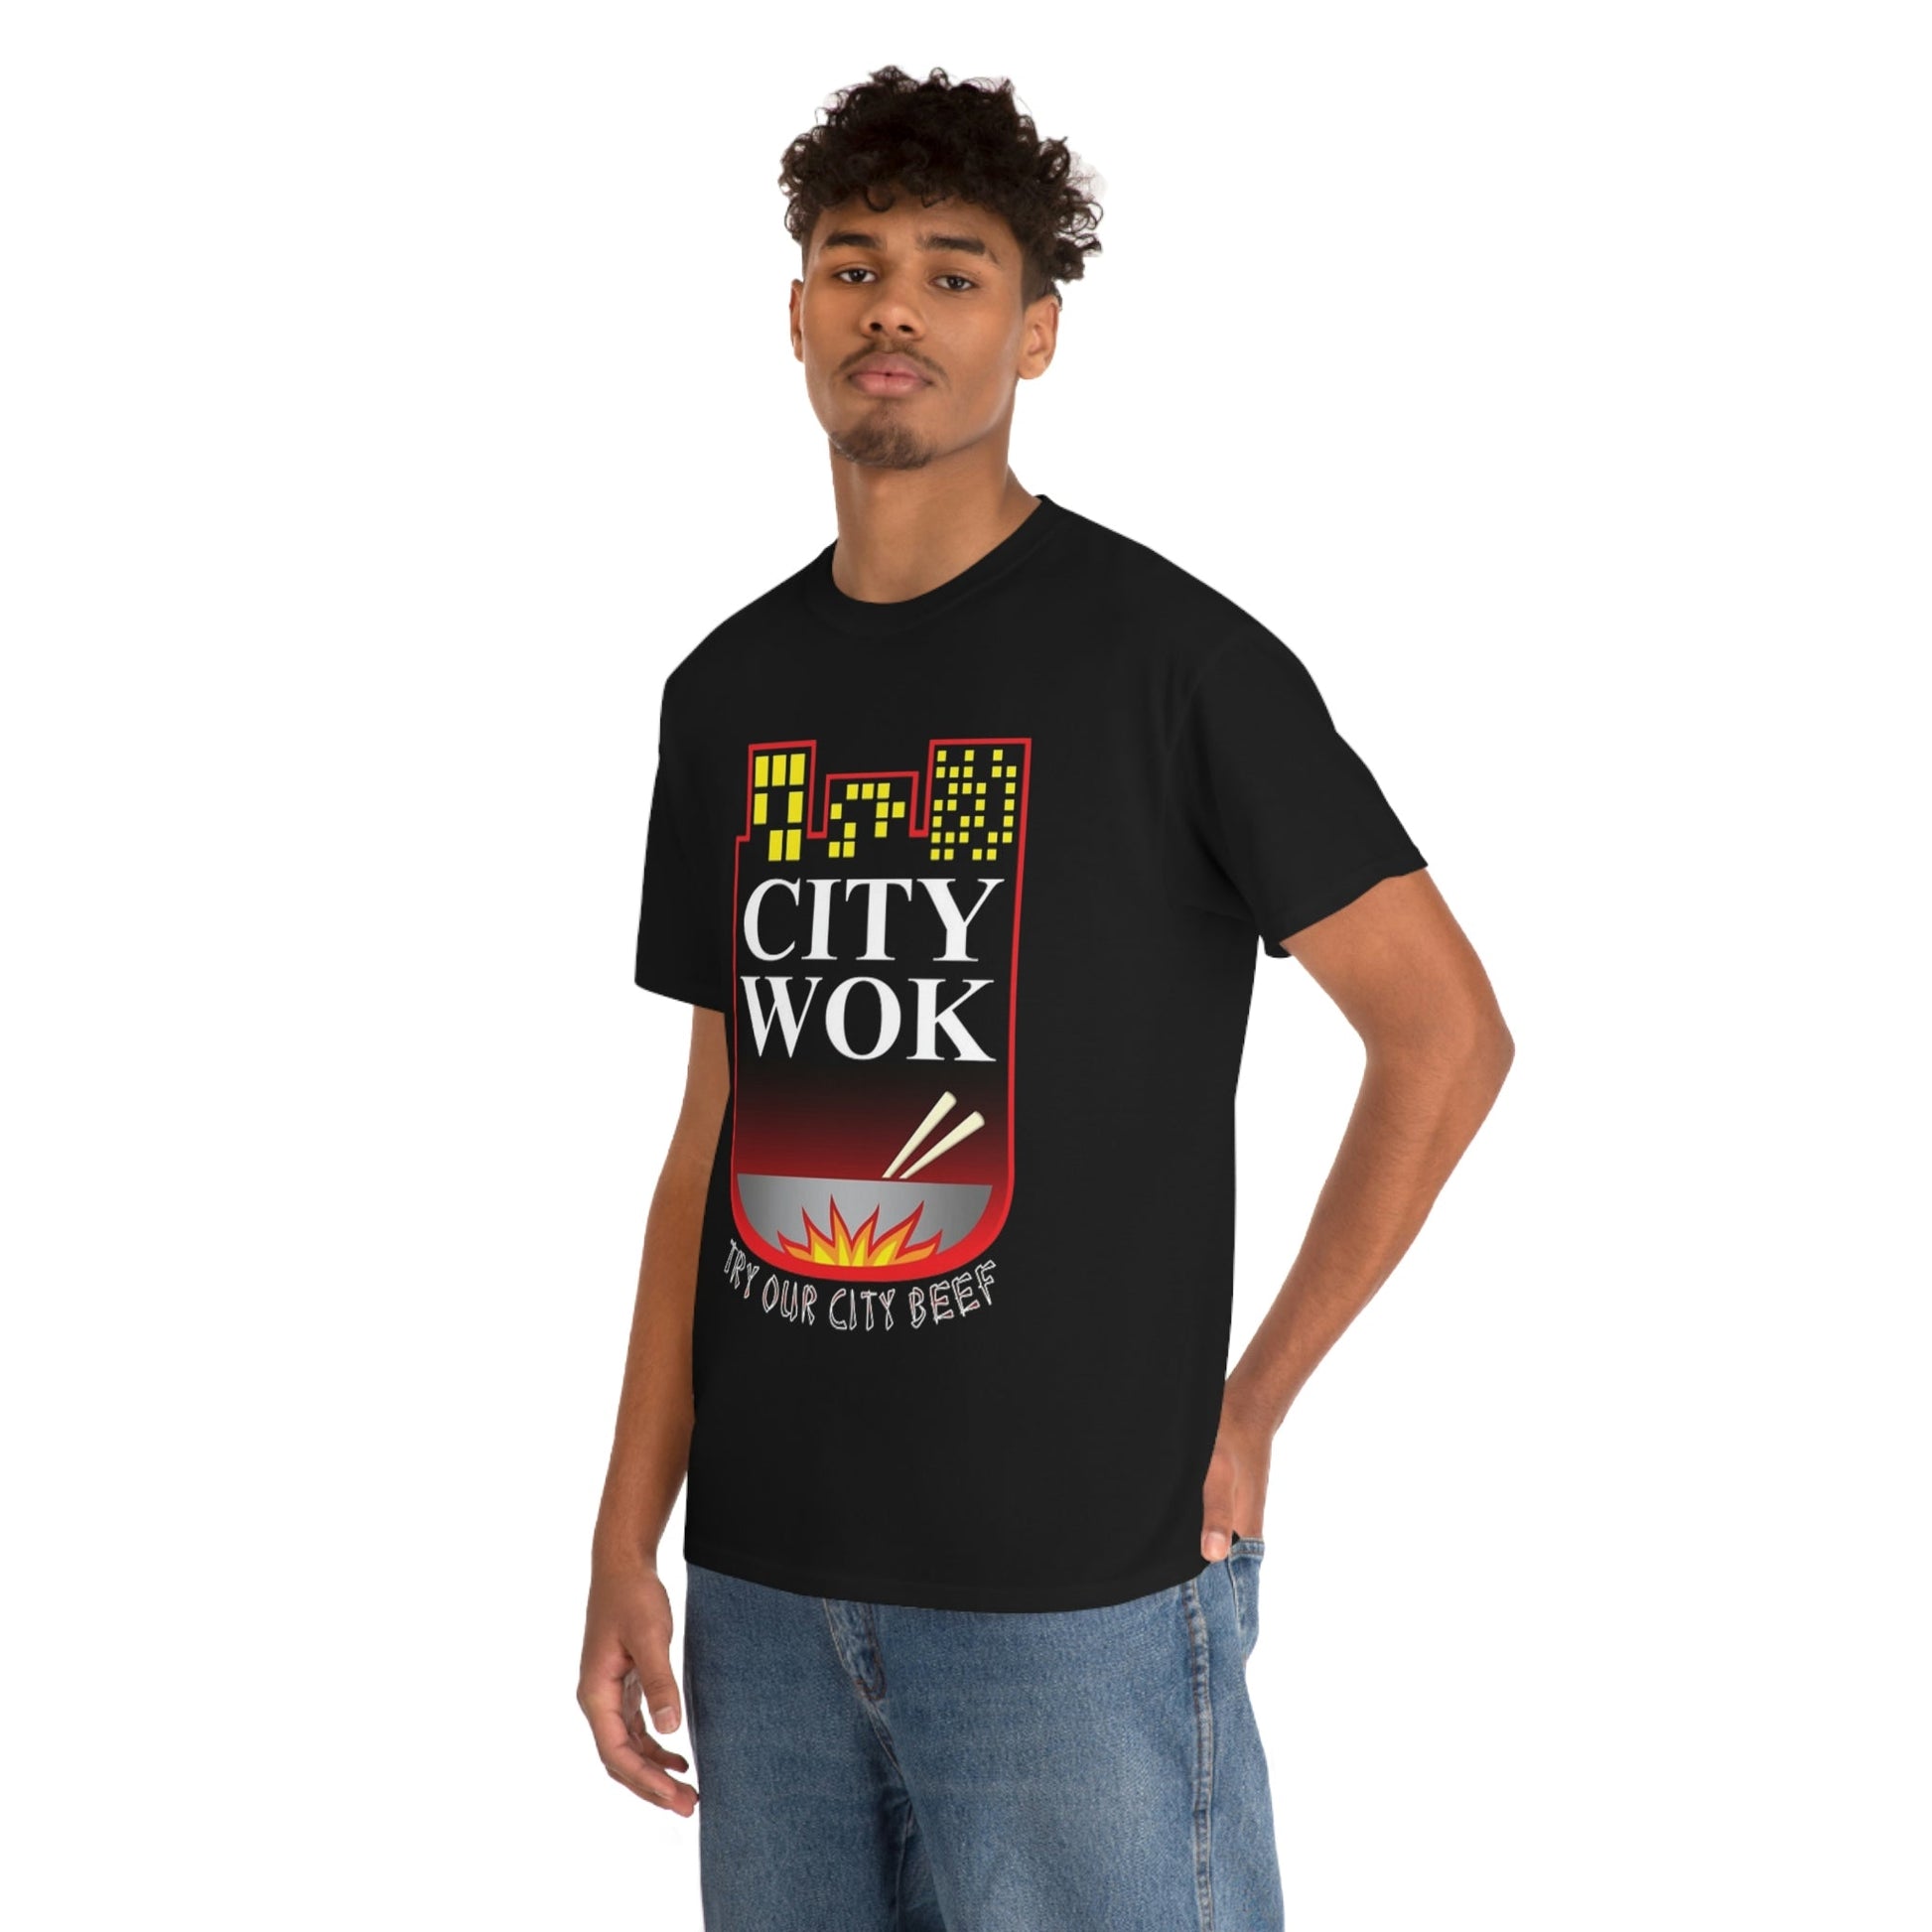 City Wok - Try Our City Beef T-Shirt - RetroTeeShop